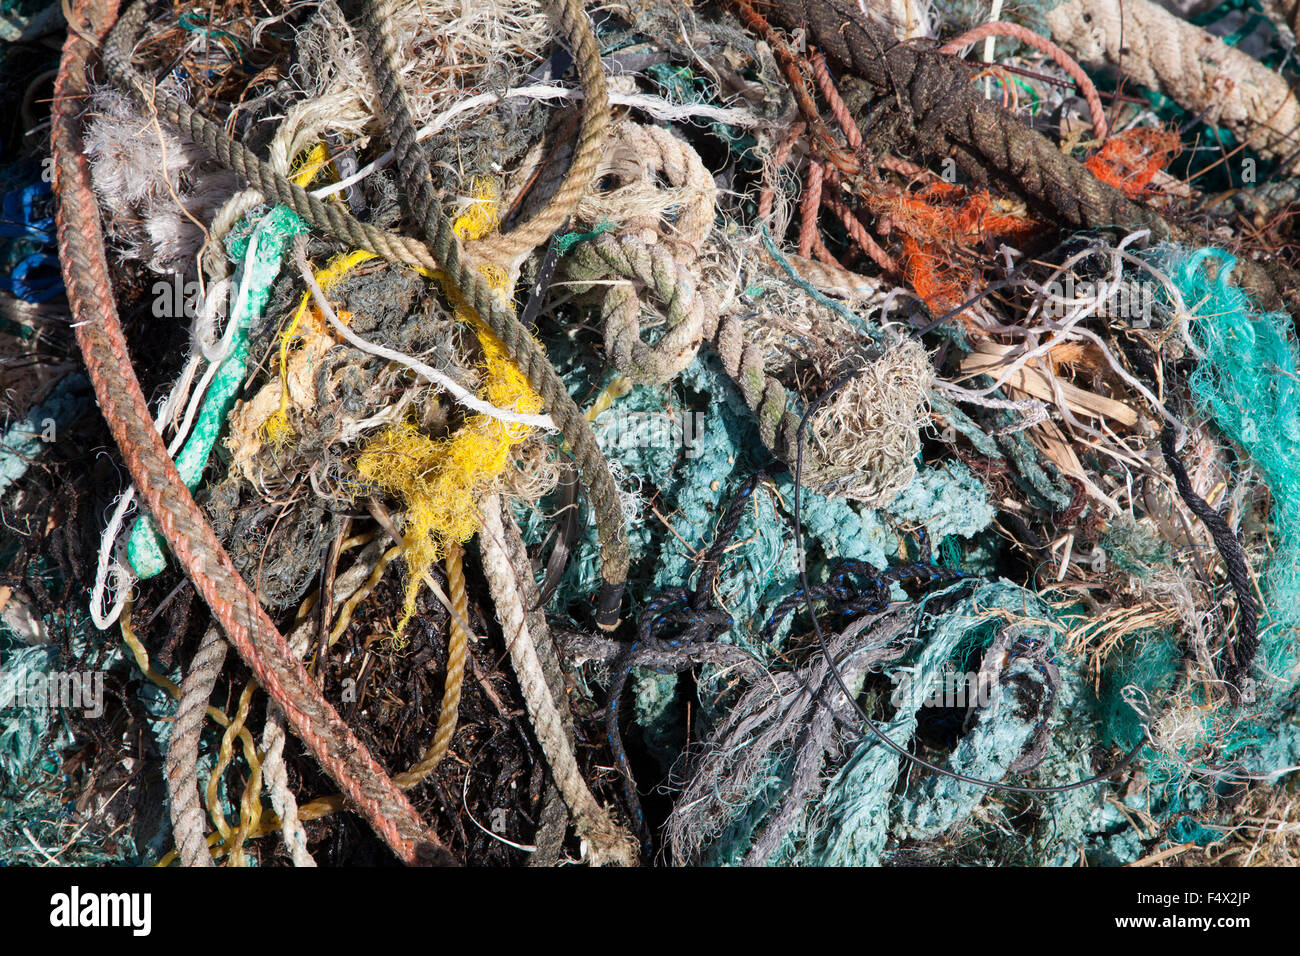 Ropes and nets collected along the coast of a North Pacific island by tourists for proper disposal to prevent harm to marine wildlife Stock Photo